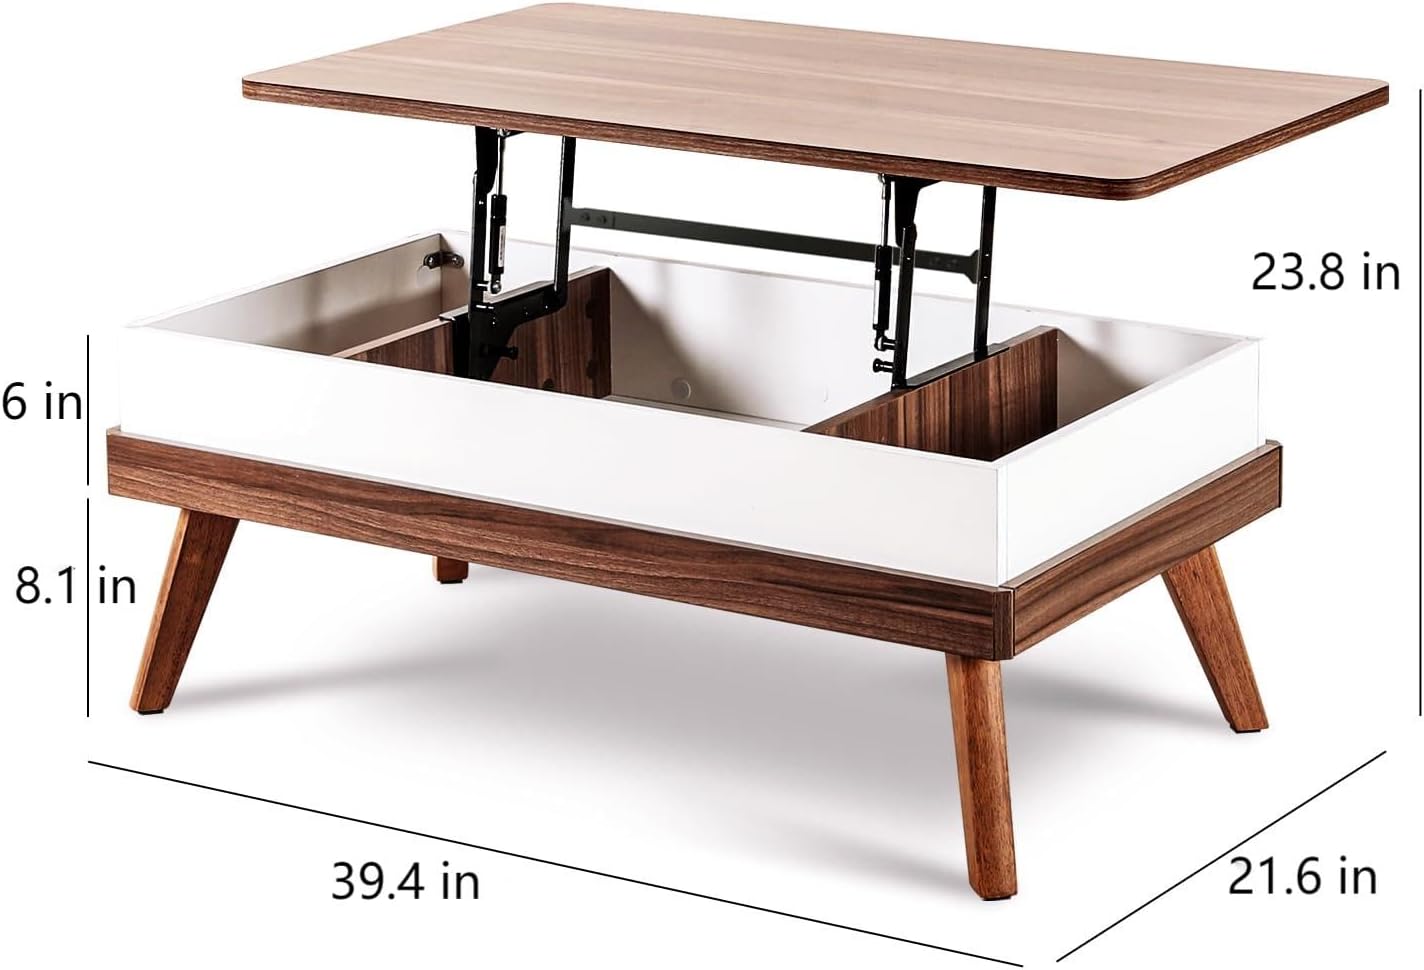 Lift Top Coffee Table for Living Room, Pre-Assembled Lift-up Center Table with Hidden Storage Compartment, Convertible Coffee Table to Work Station, 39.4 W x 21.6 D x 23.8 H, Walnut